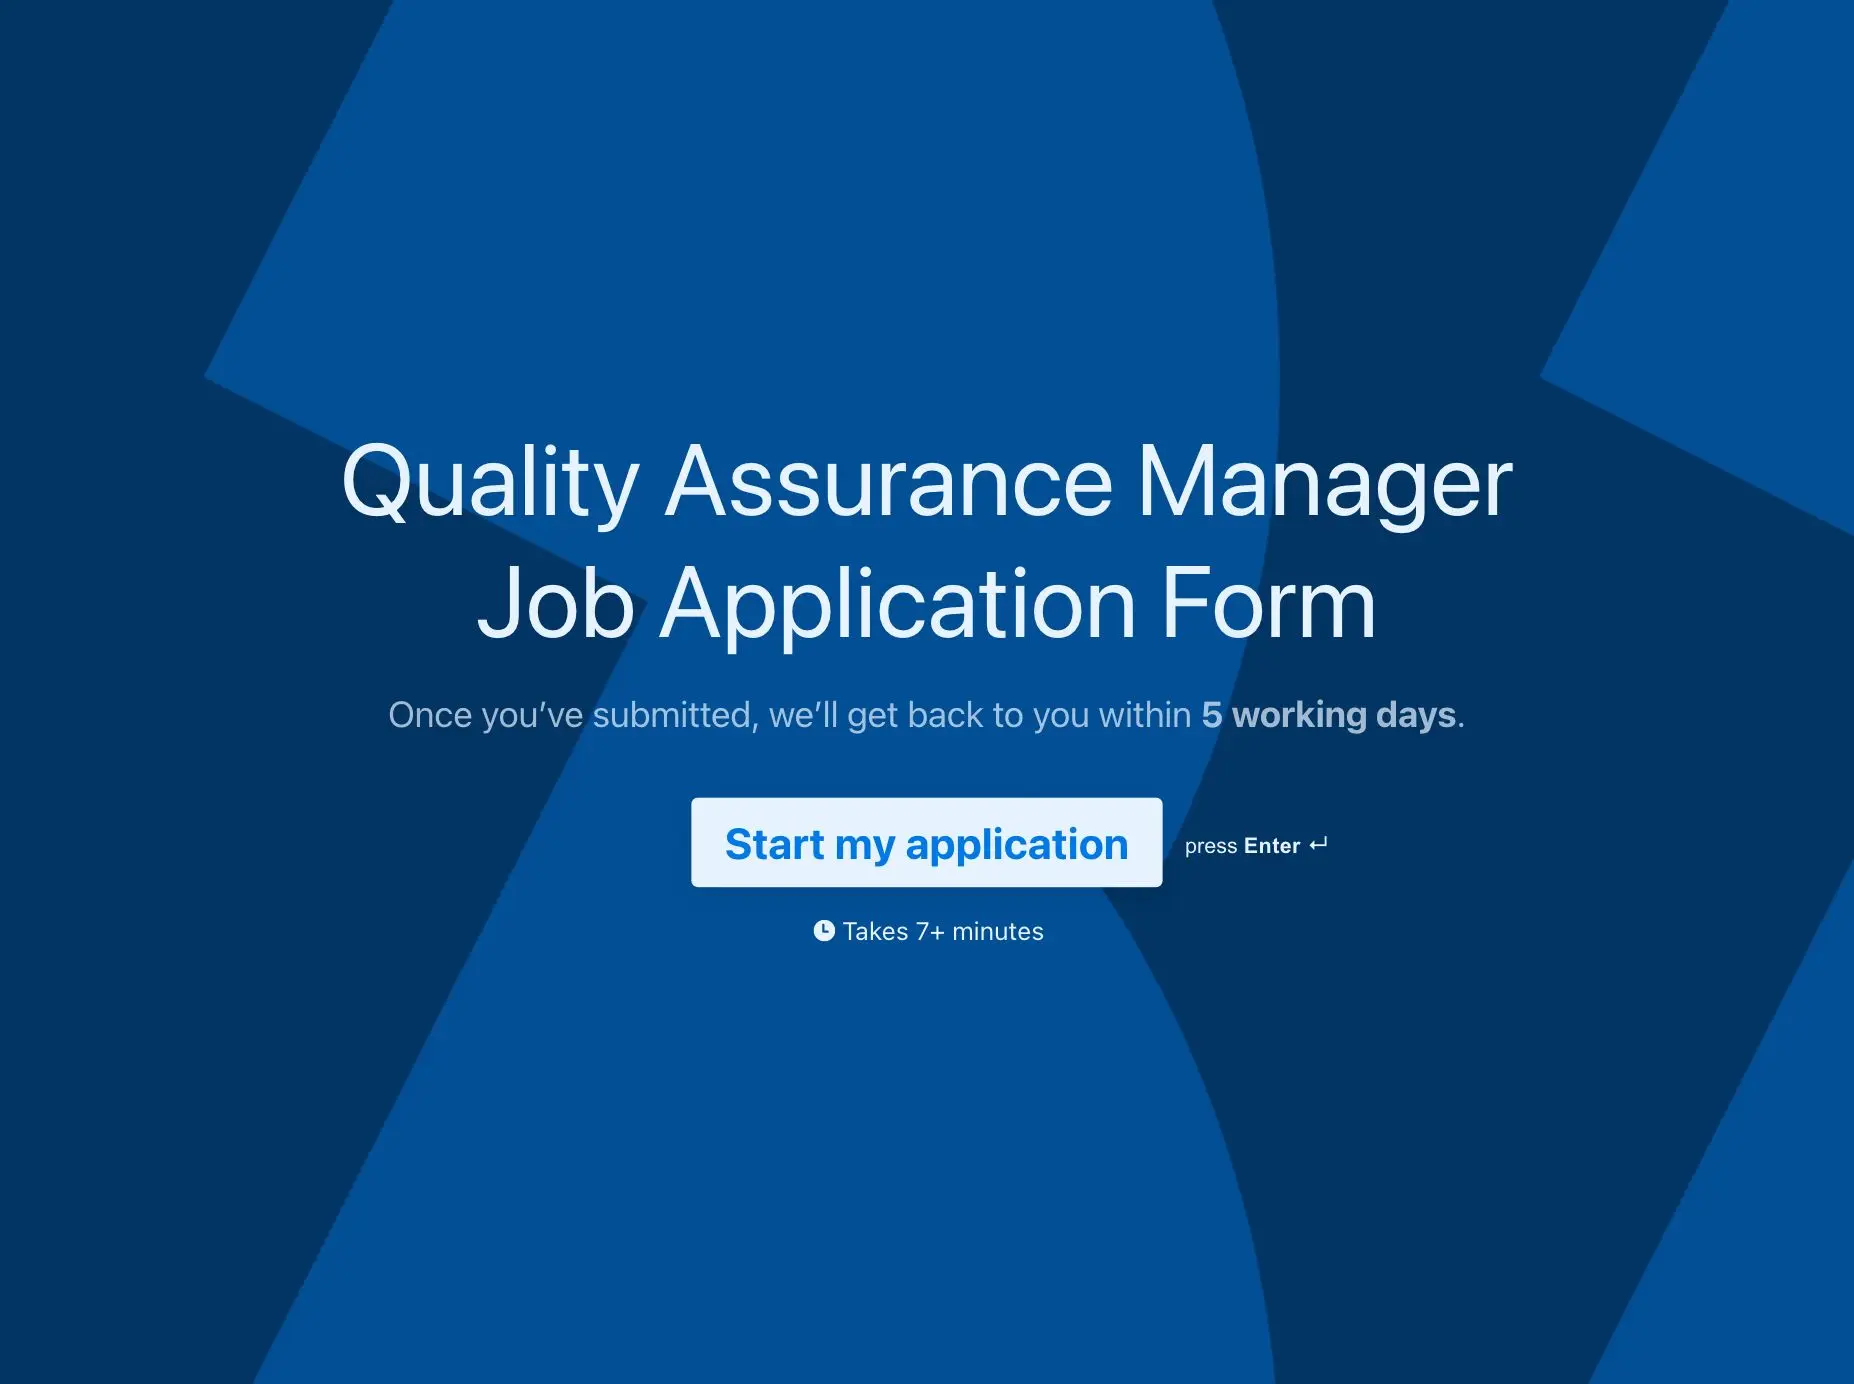 Quality Assurance Manager Job Application Form Template Hero